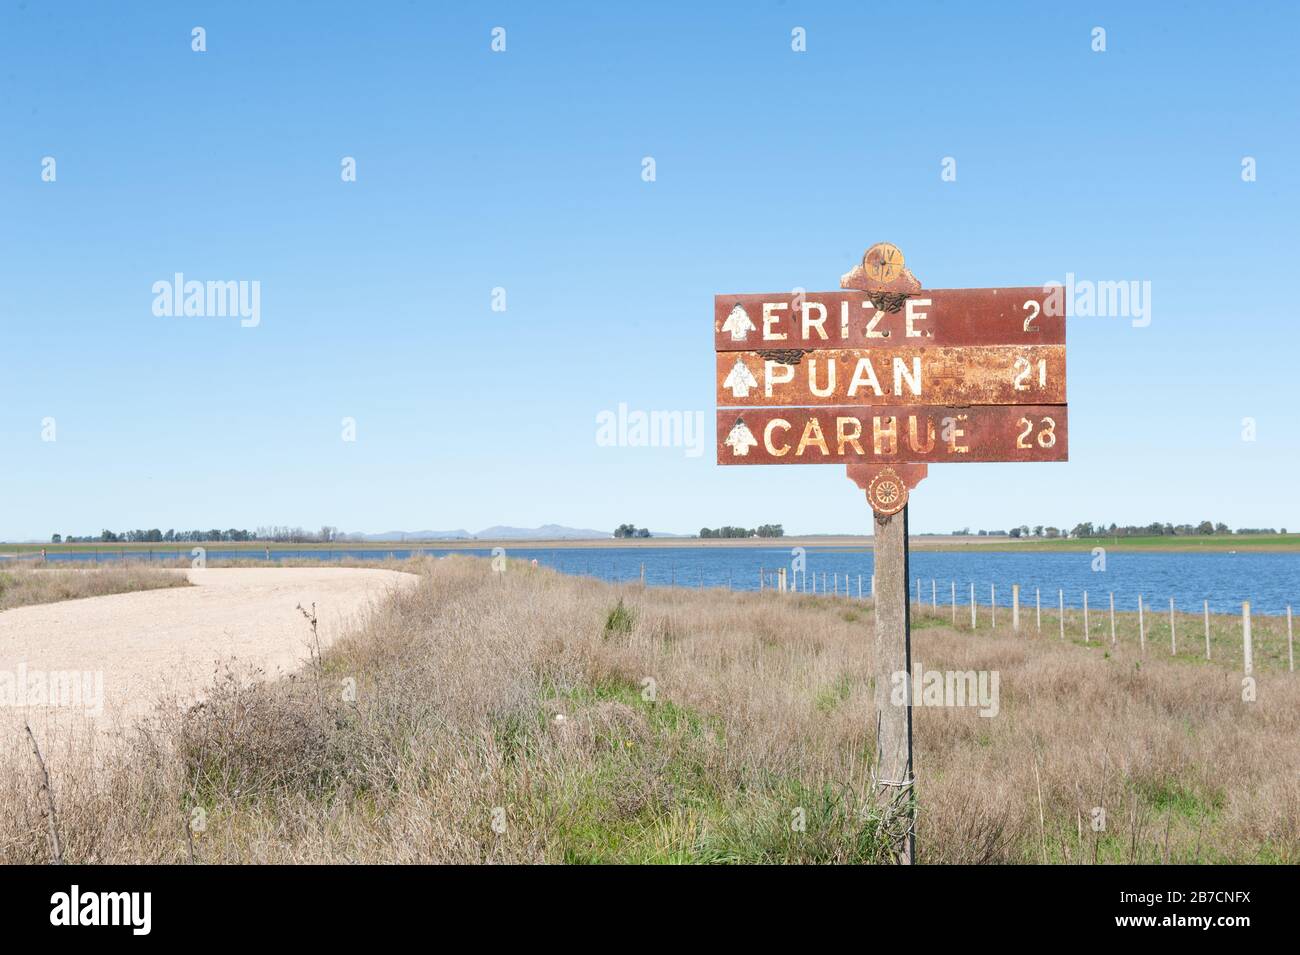 Buenos Aires, Argentina - May 30 2014: An old roadsign on a dirty road in western Buenos Aires Province Stock Photo